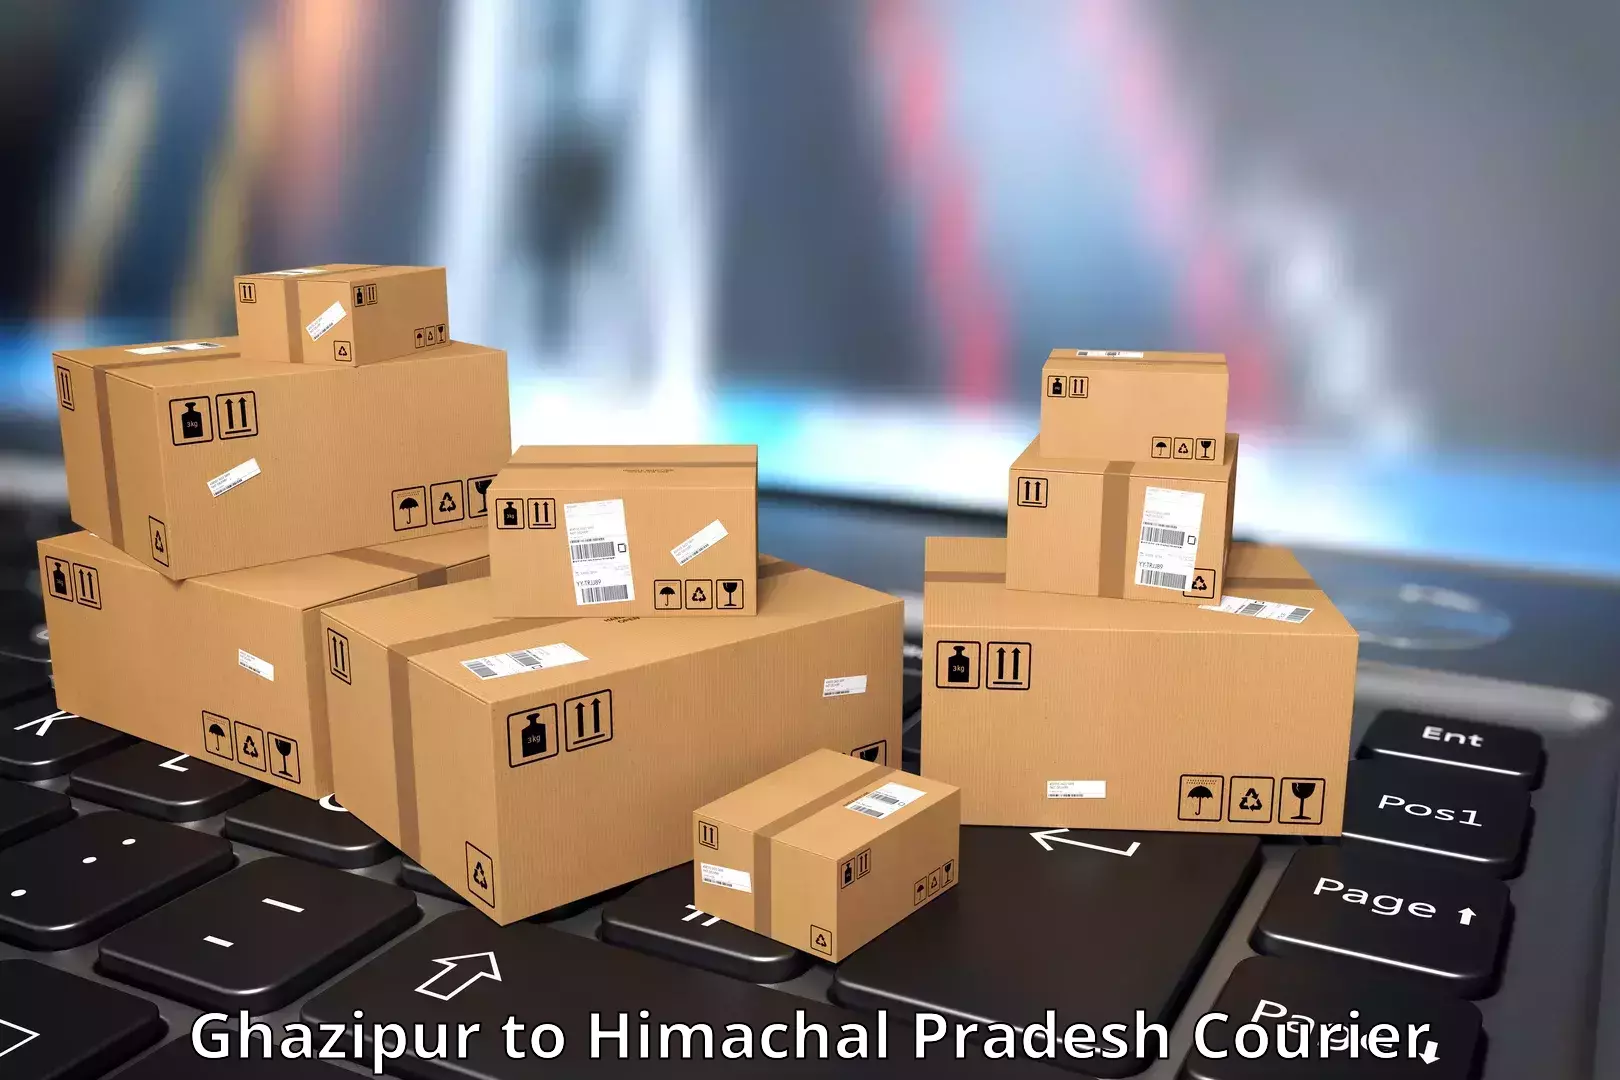 Air courier services in Ghazipur to Himachal Pradesh